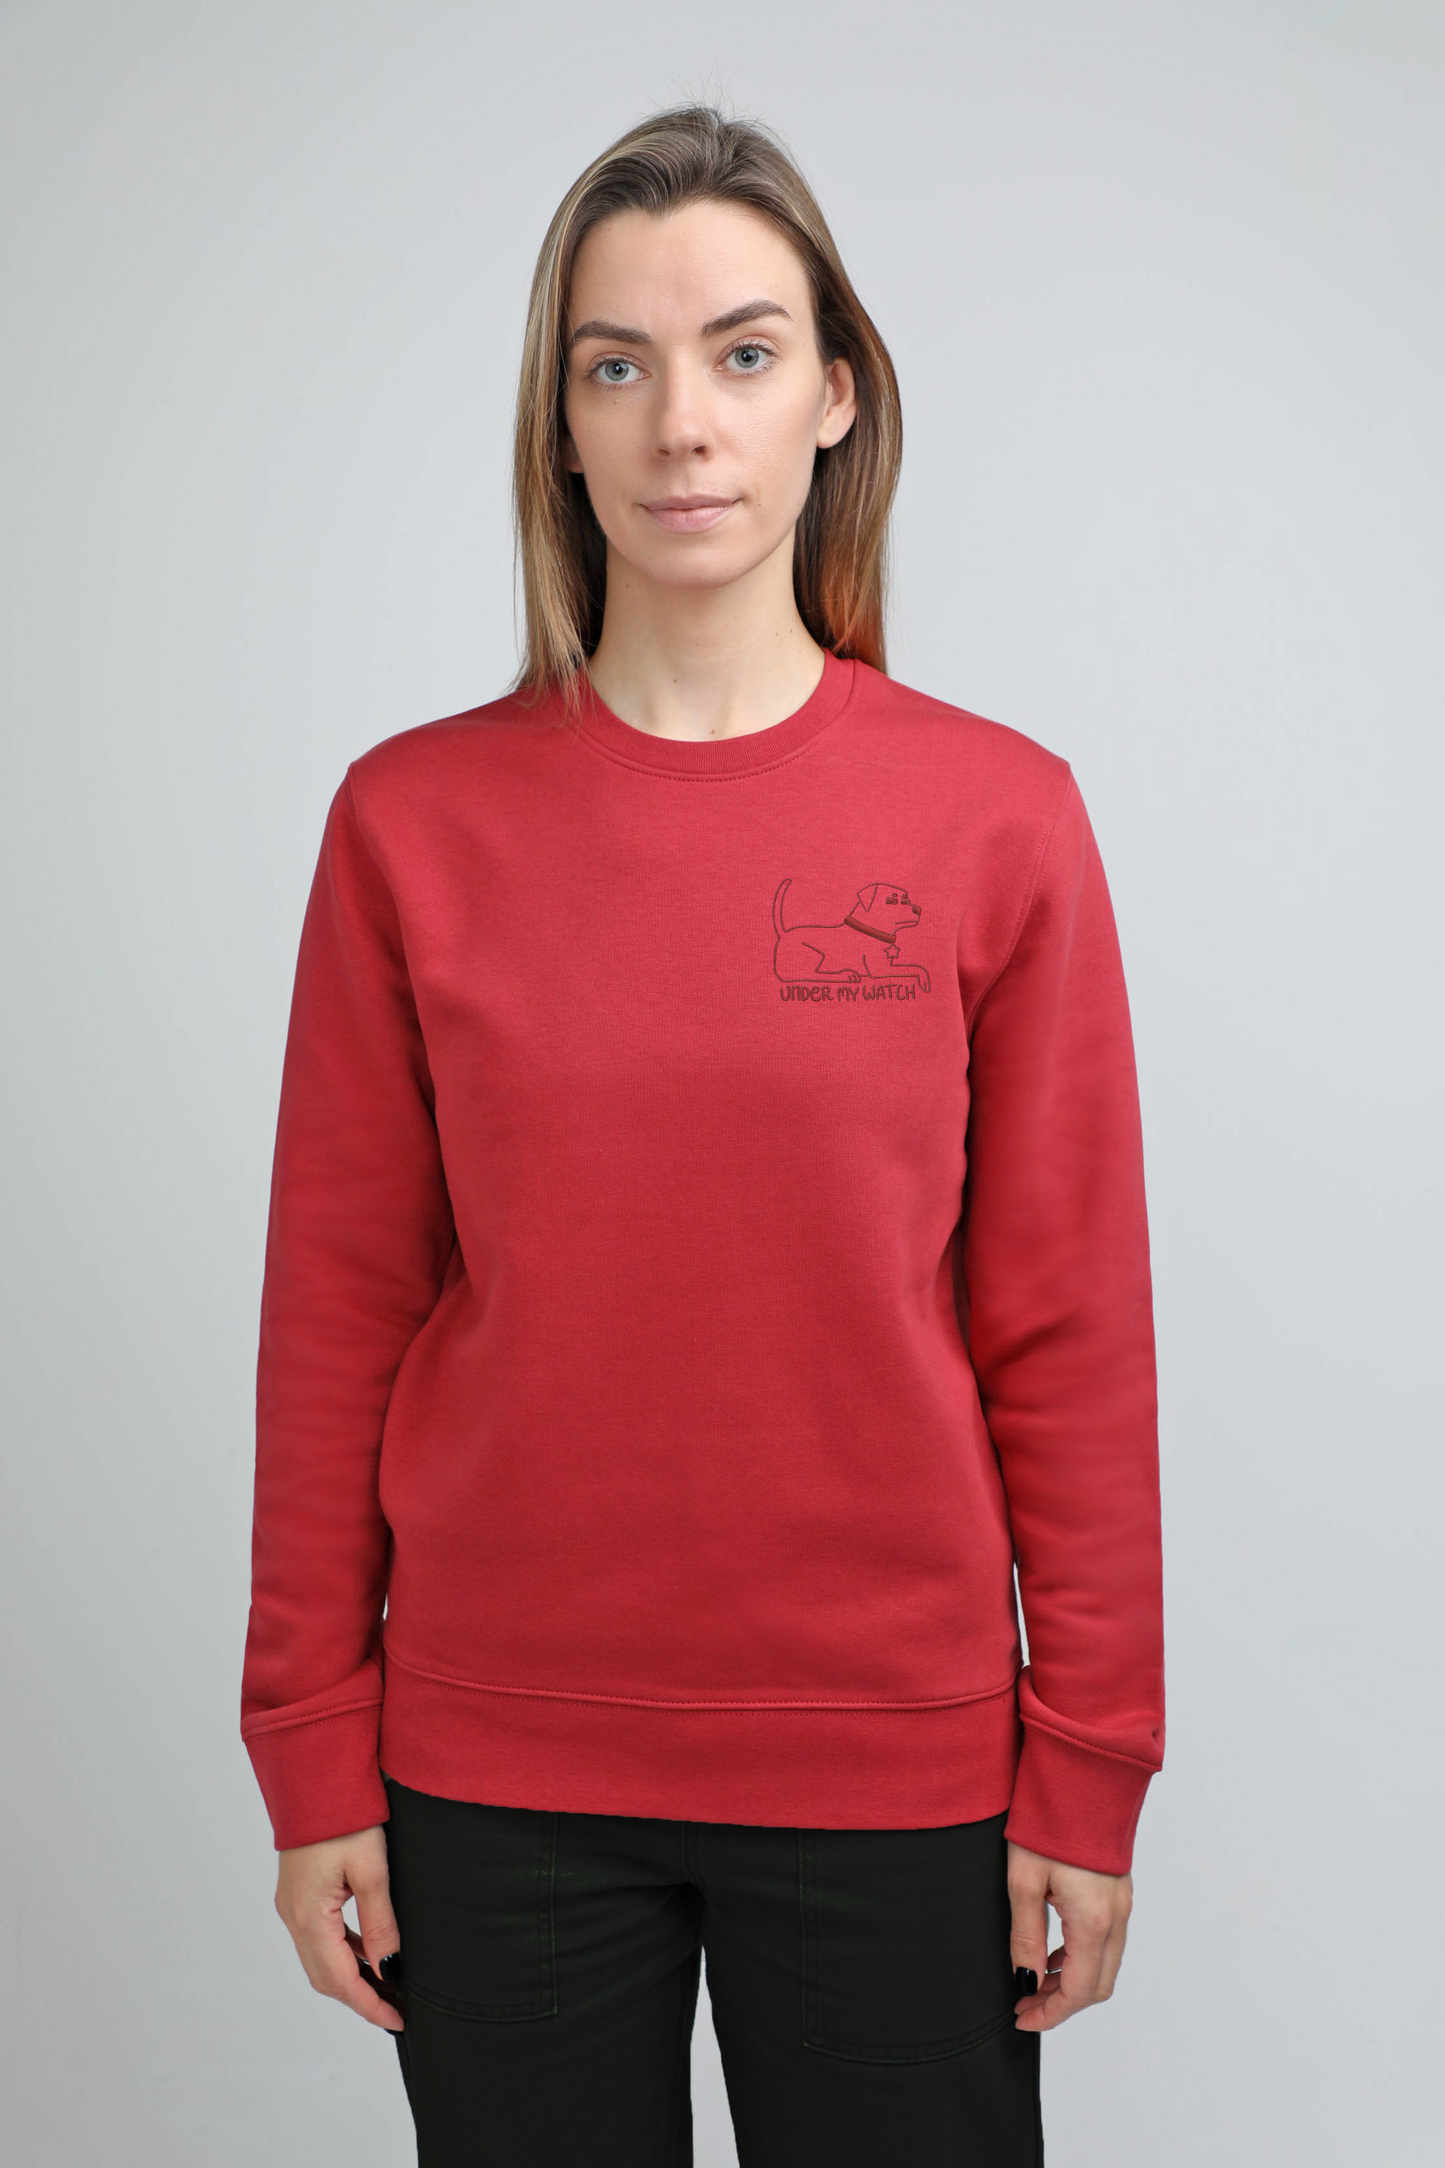 XL available only | Under my watch | Crew neck sweatshirt with embroidered dog. Regular fit | Unisex by My Wild Other